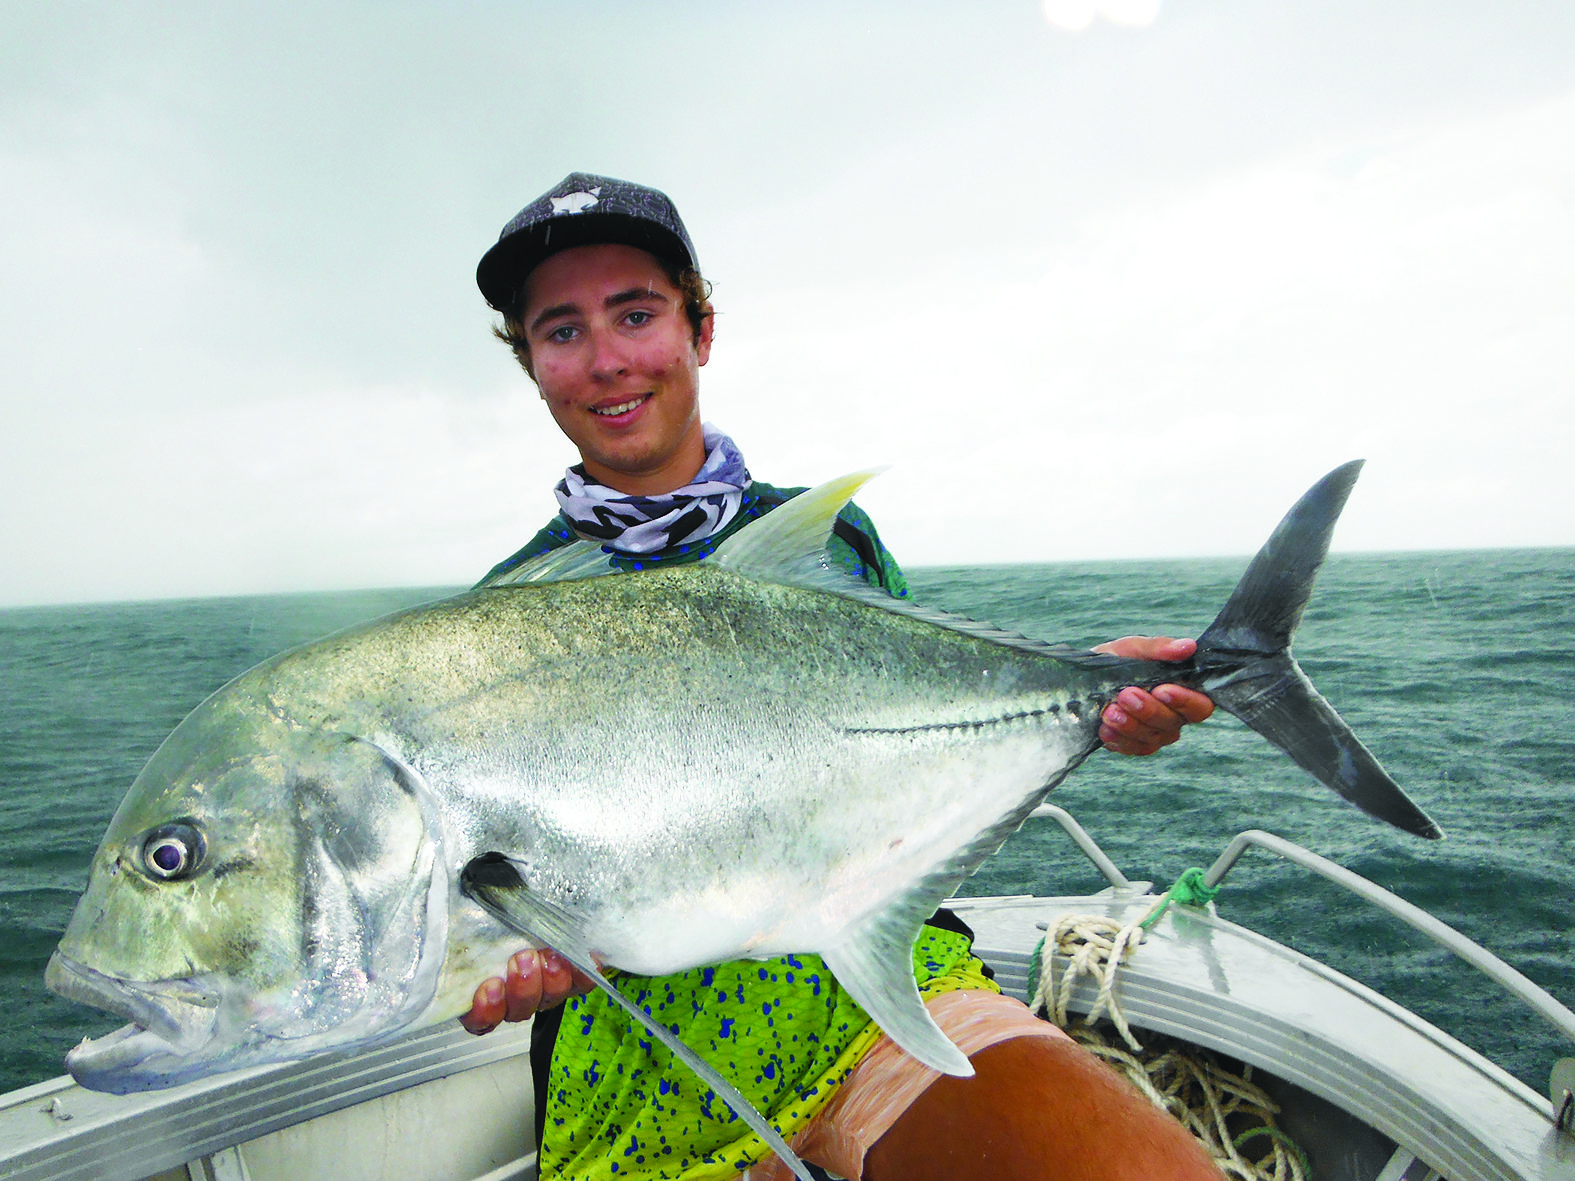 Matthew with a cracking giant trevally caught using a surface popper.